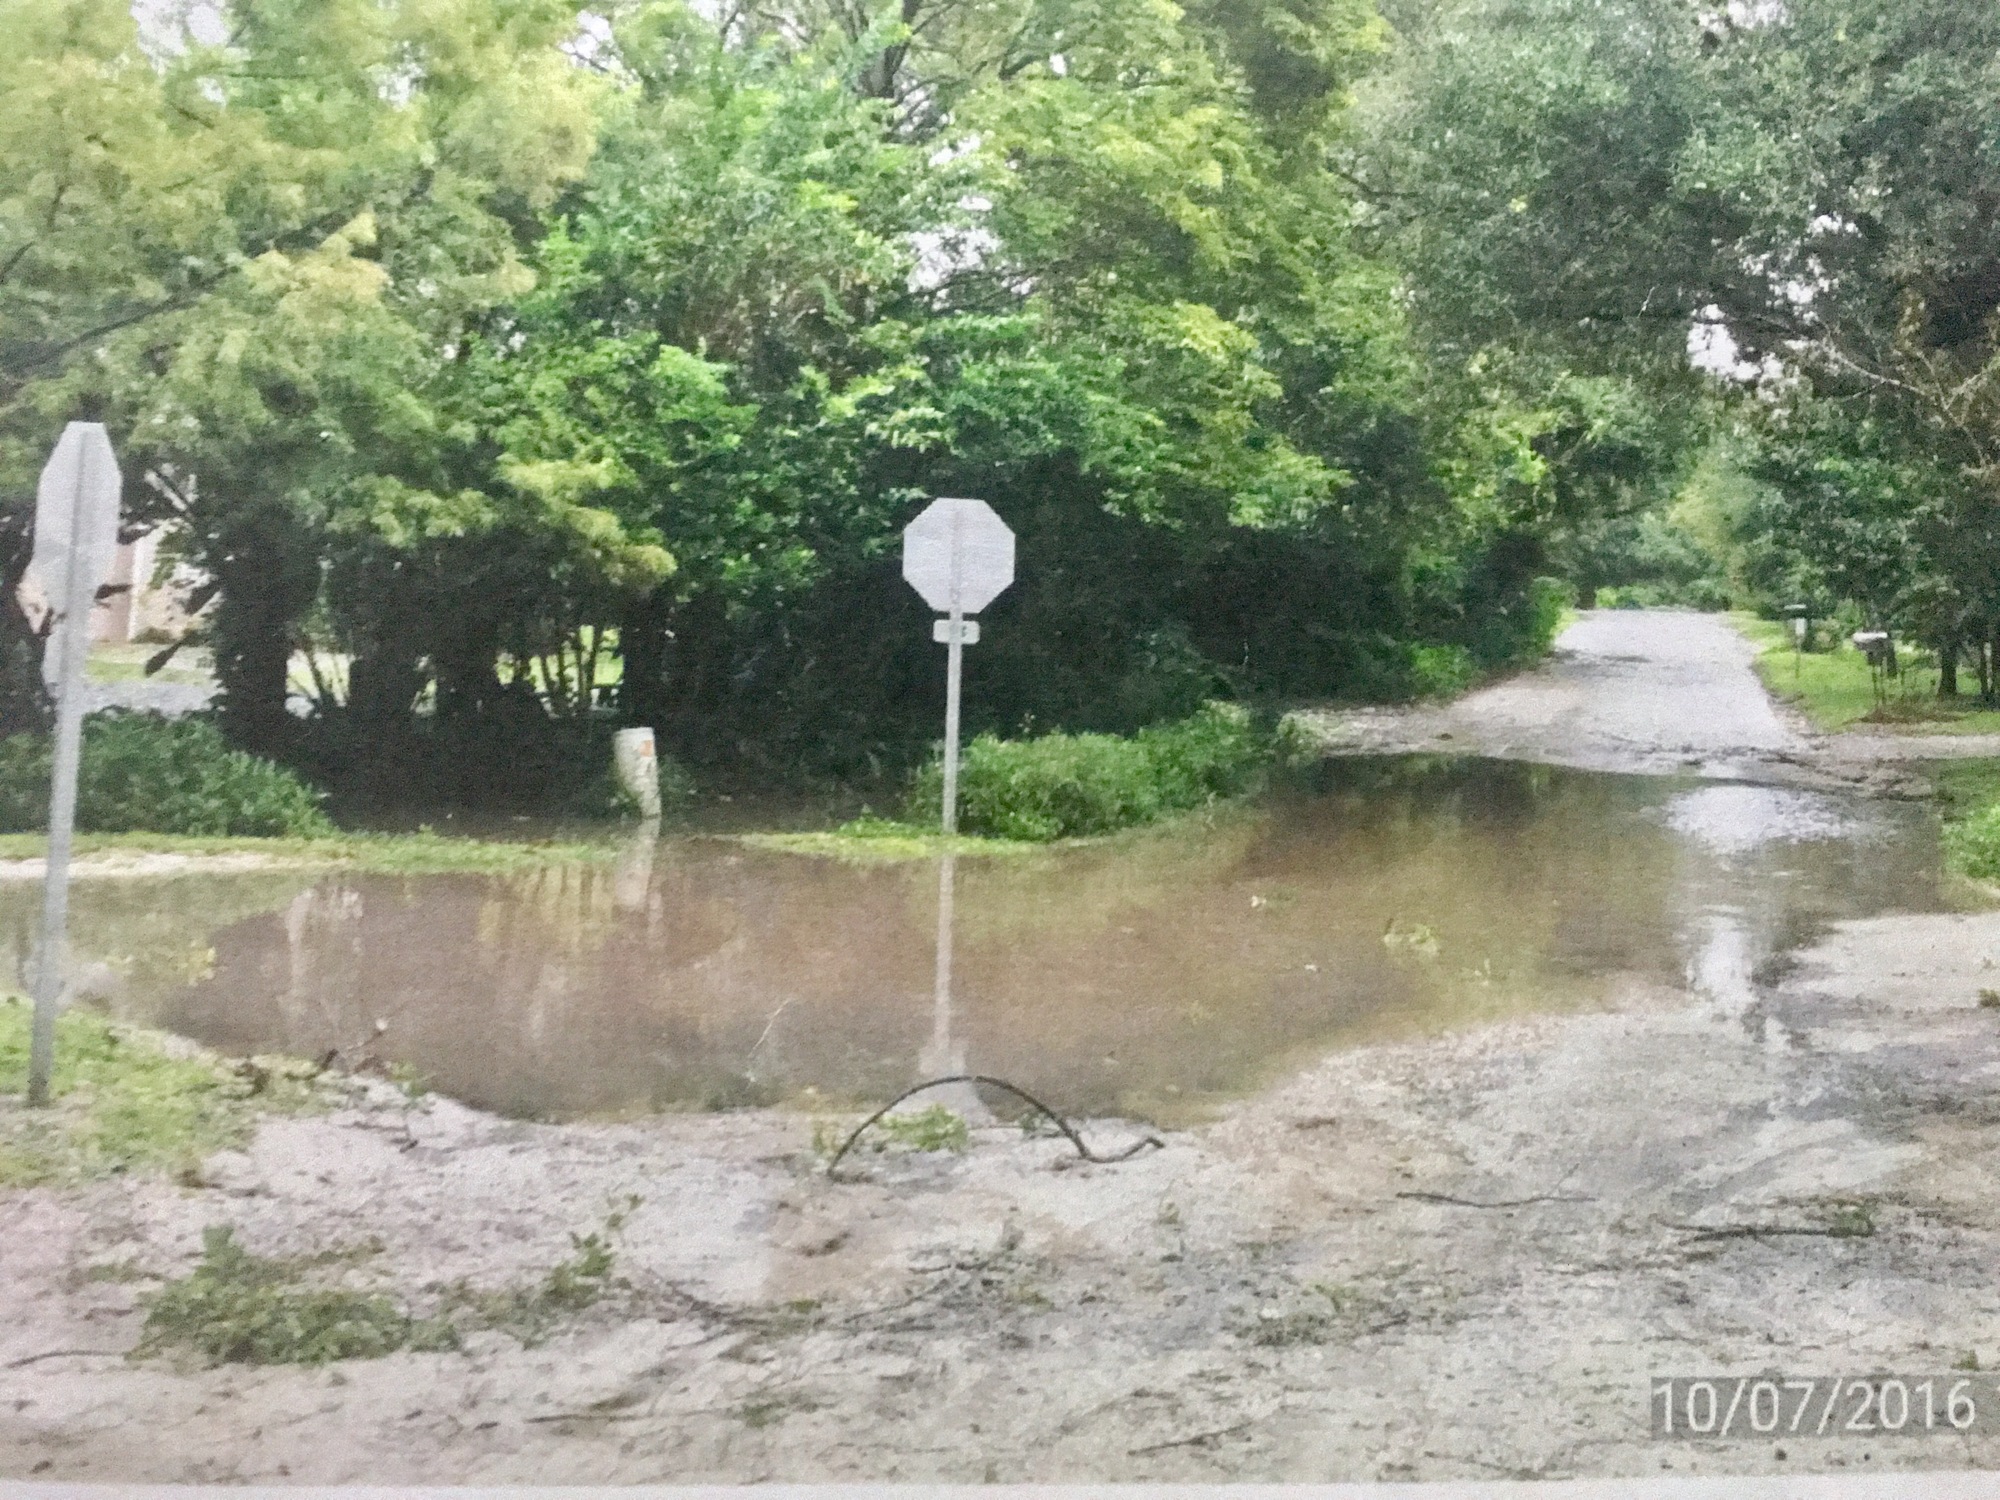 The area where the stop sign is located is prone to flooding on occasion.